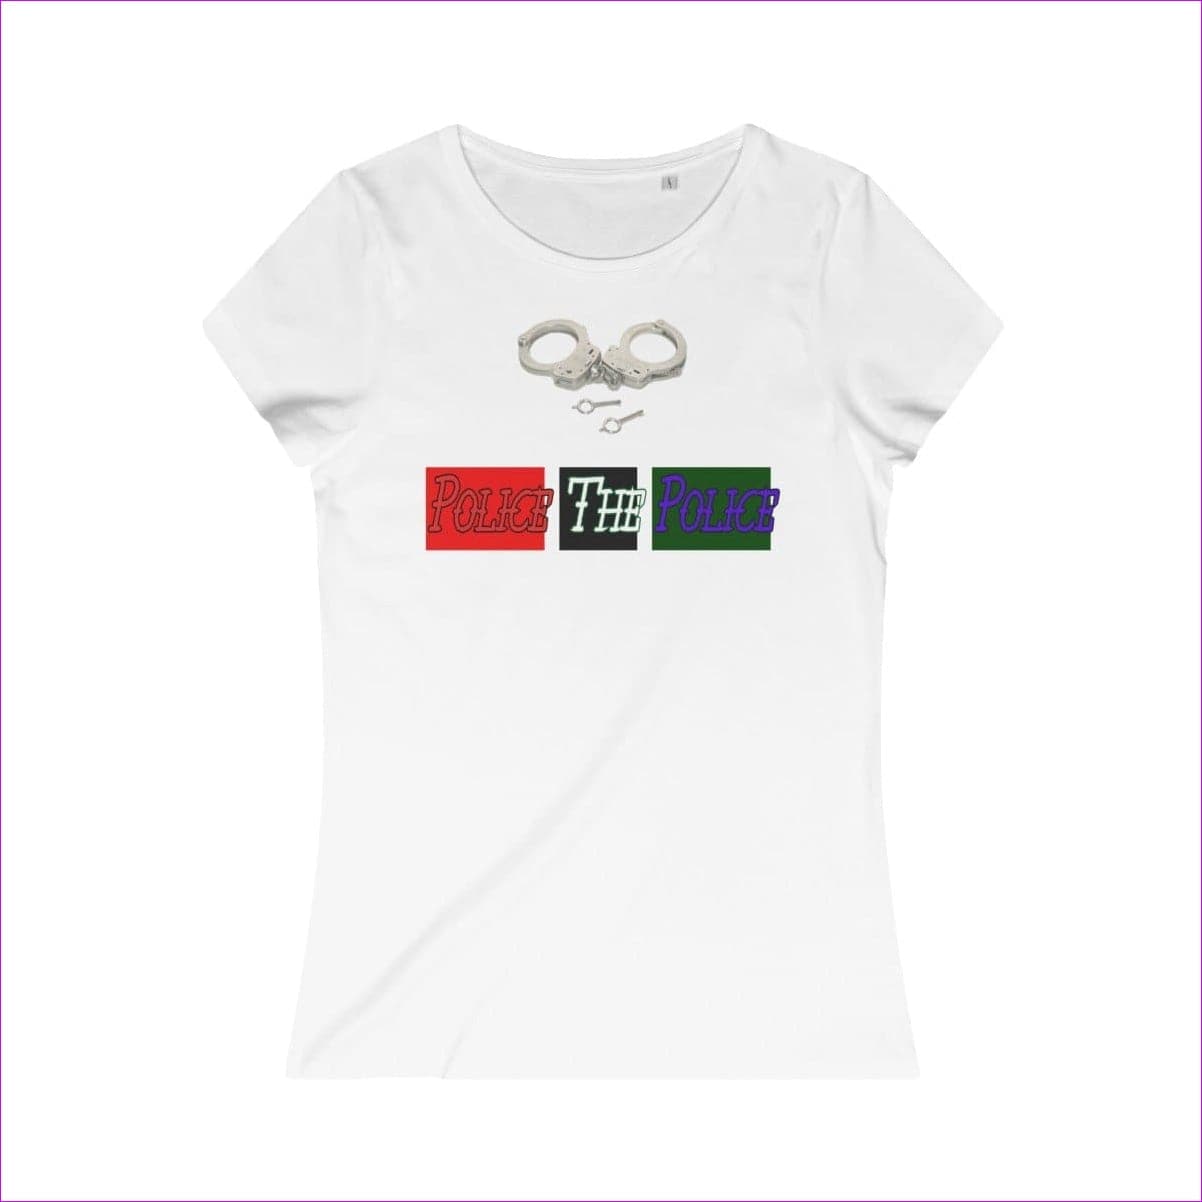 White - \Police The Police Womens Organic Tee - Womens T-Shirt at TFC&H Co.